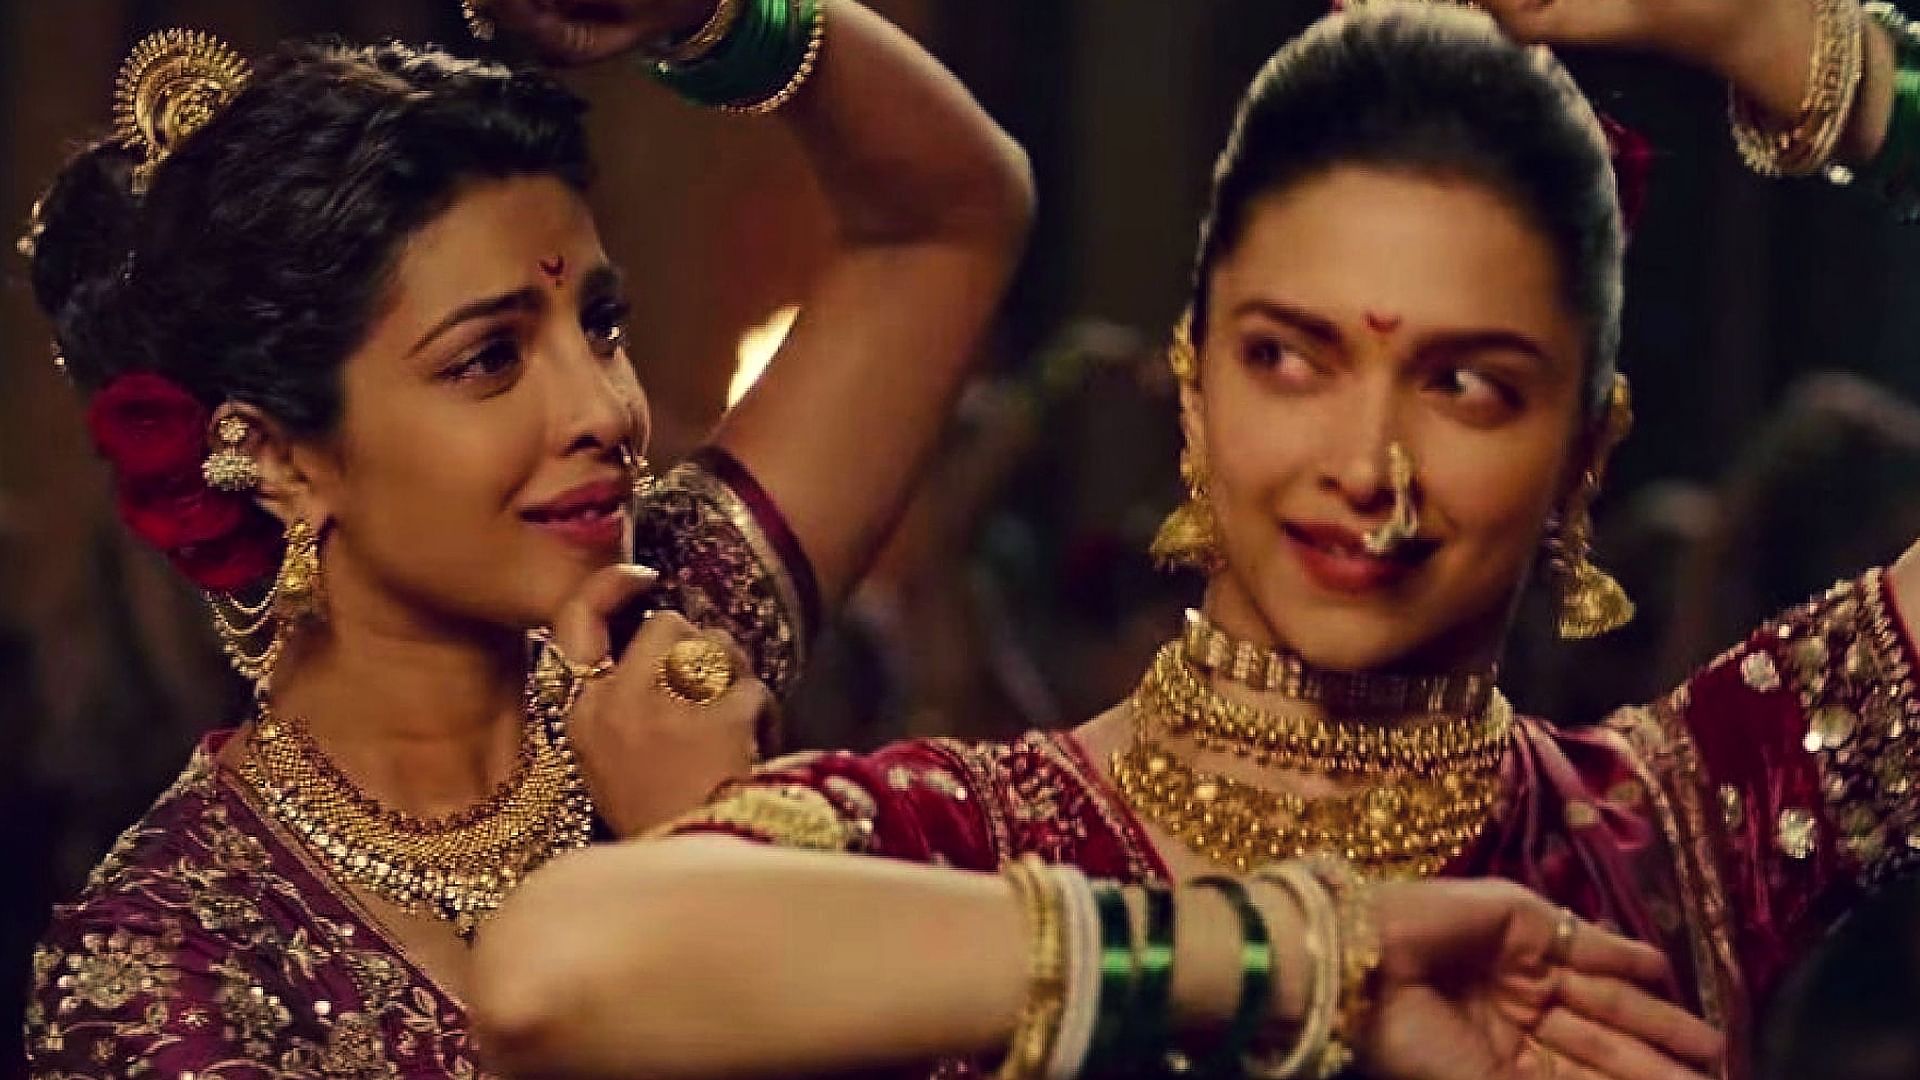 Priyanka Chopra manages to hold her ground despite playing second fiddle to Deepika Padukone’s character in <i>Bajirao Mastani </i>(Photo: YouTube/<a href="https://www.youtube.com/channel/UCX52tYZiEh_mHoFja3Veciw">Eros Now</a>)